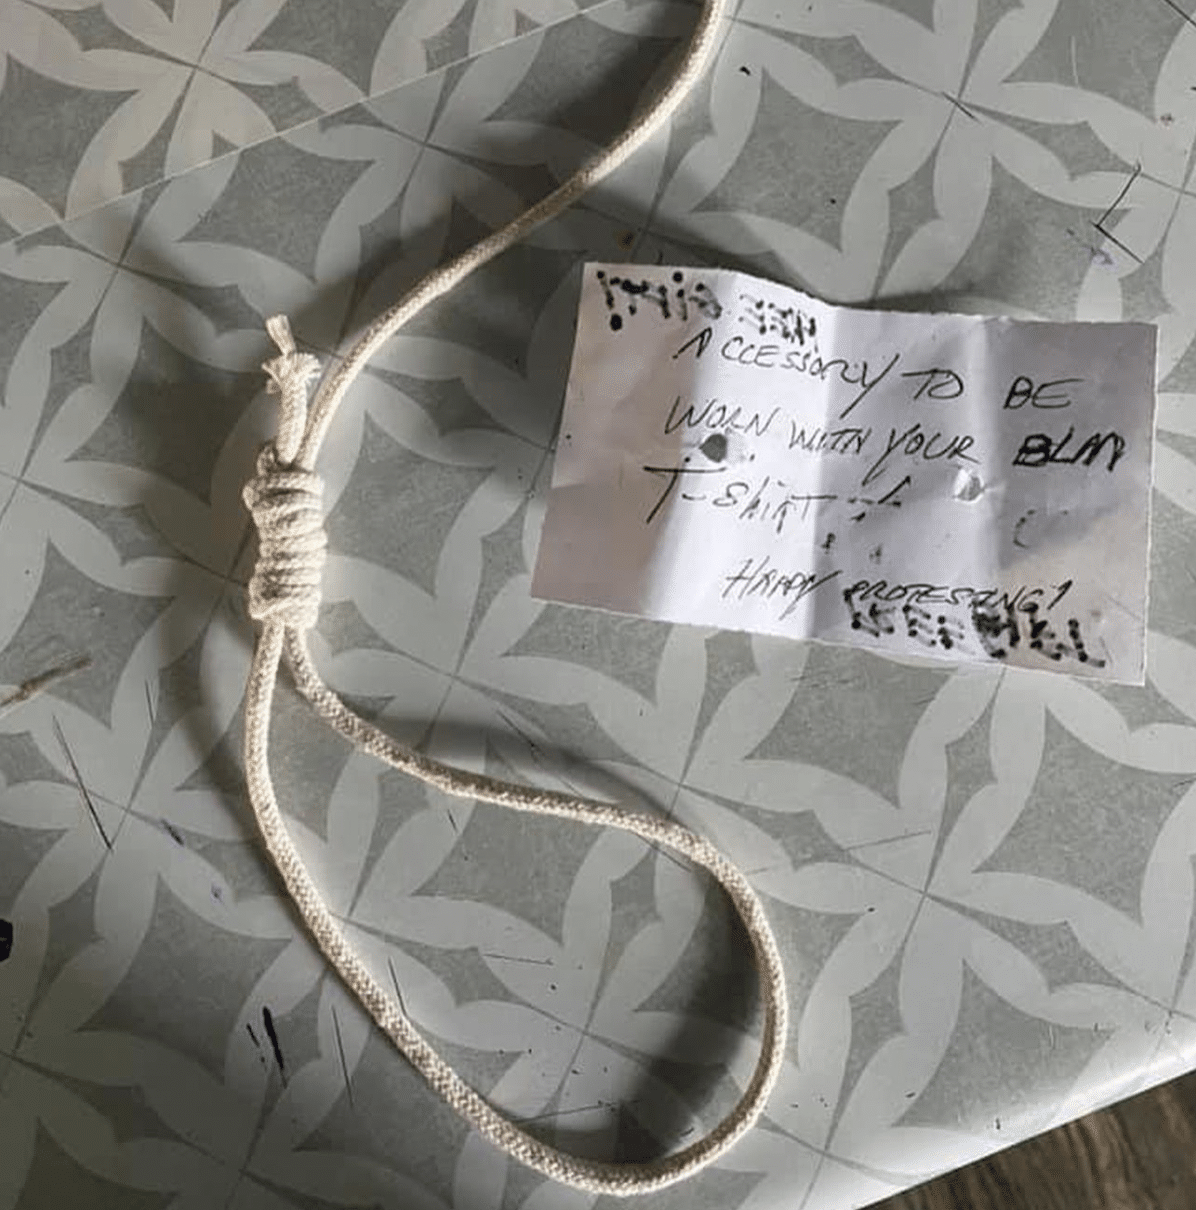 Police in Saginaw are investigating a possible racially motivated crime after a family found a noose and note on Sunday, July 12, 2020 in a vehicle outside their North Carolina Street home.